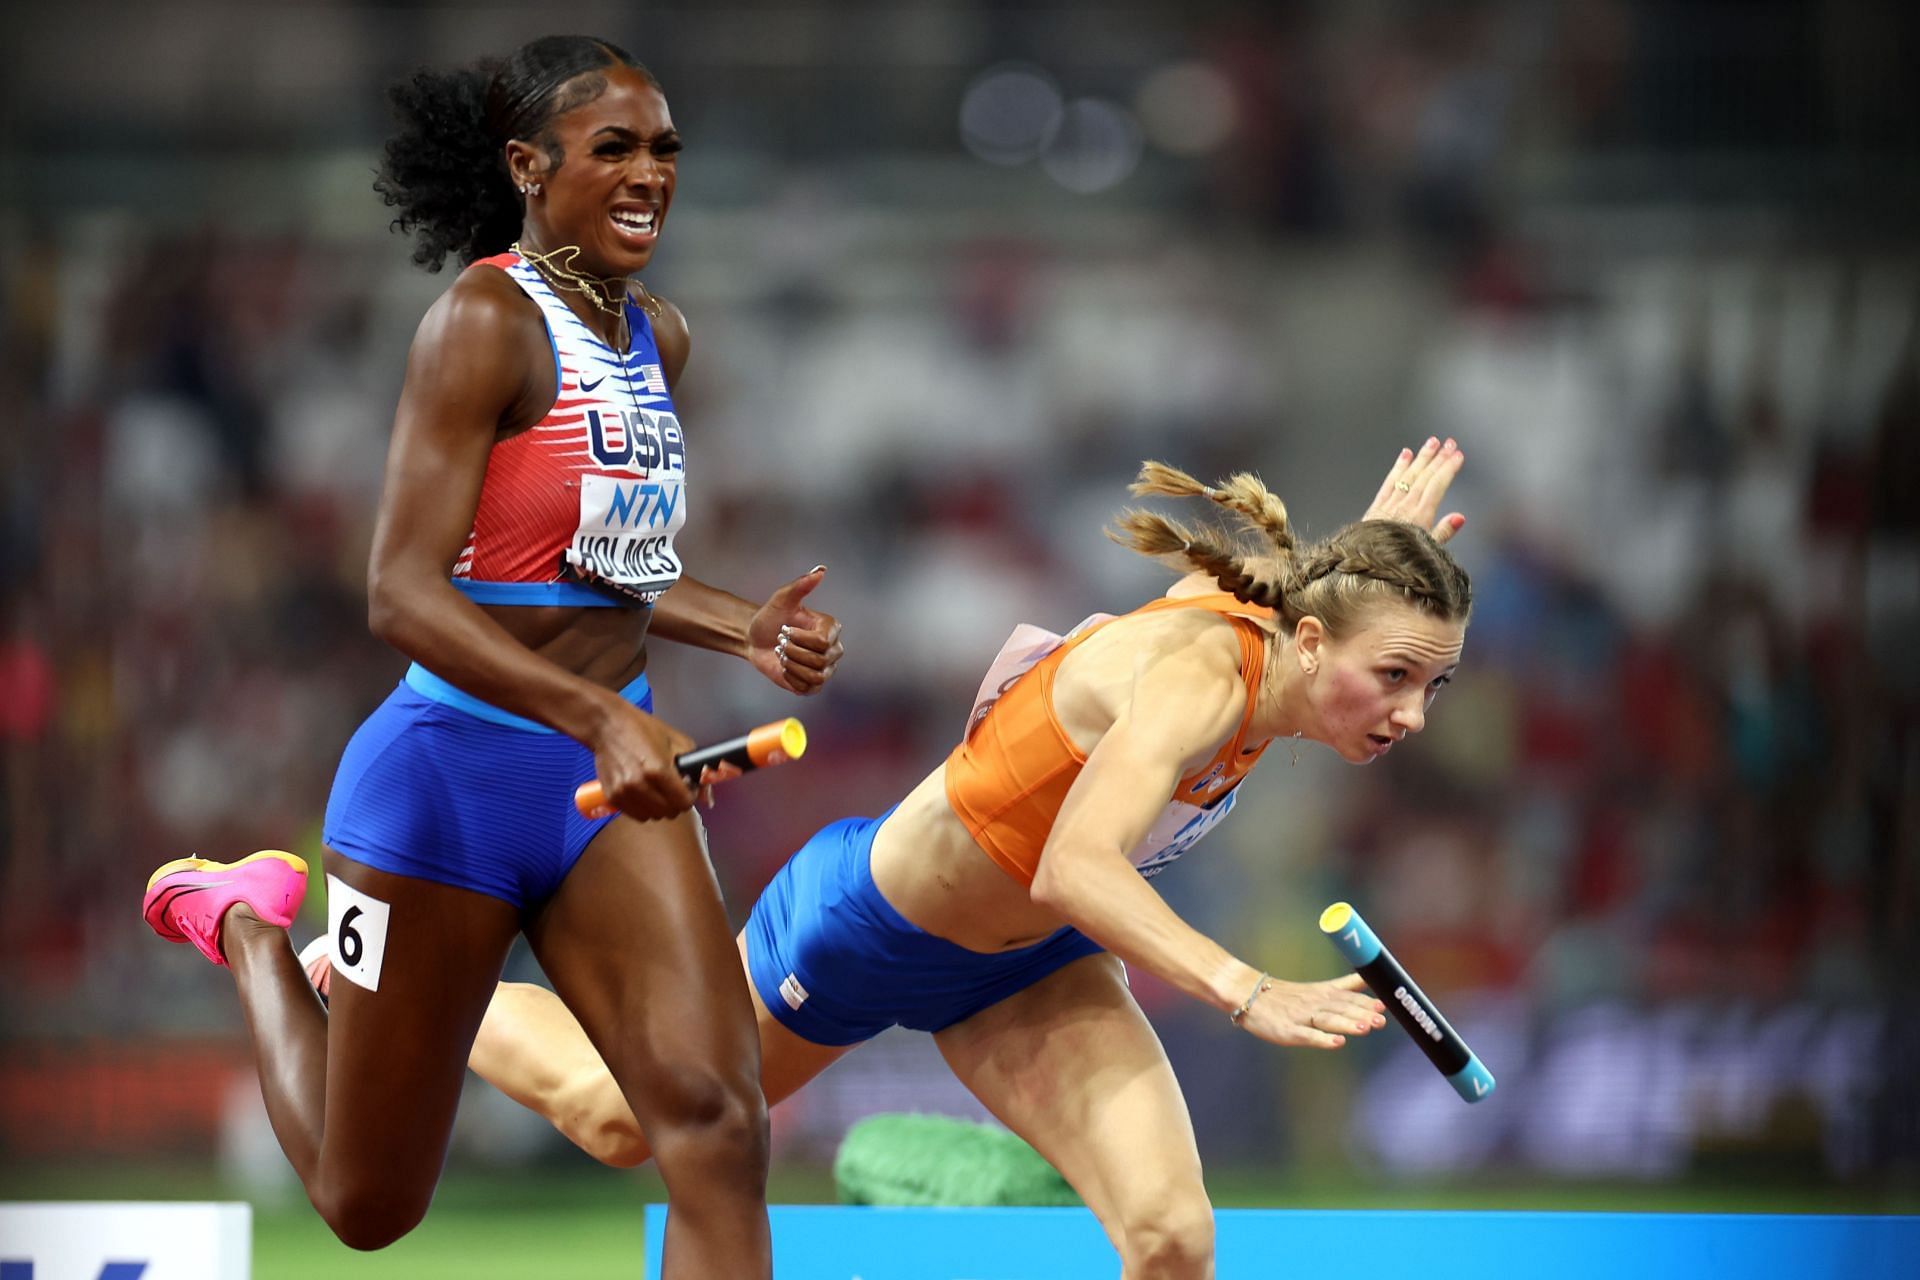 Alexis Holmes of Team United States crosses the finish line to win the 4x400m Mixed Relay Final as Femke Bol of Team Netherlands falls during day one of the World Athletics Championships Budapest 2023 at the National Athletics Centre in Budapest, Hungary.